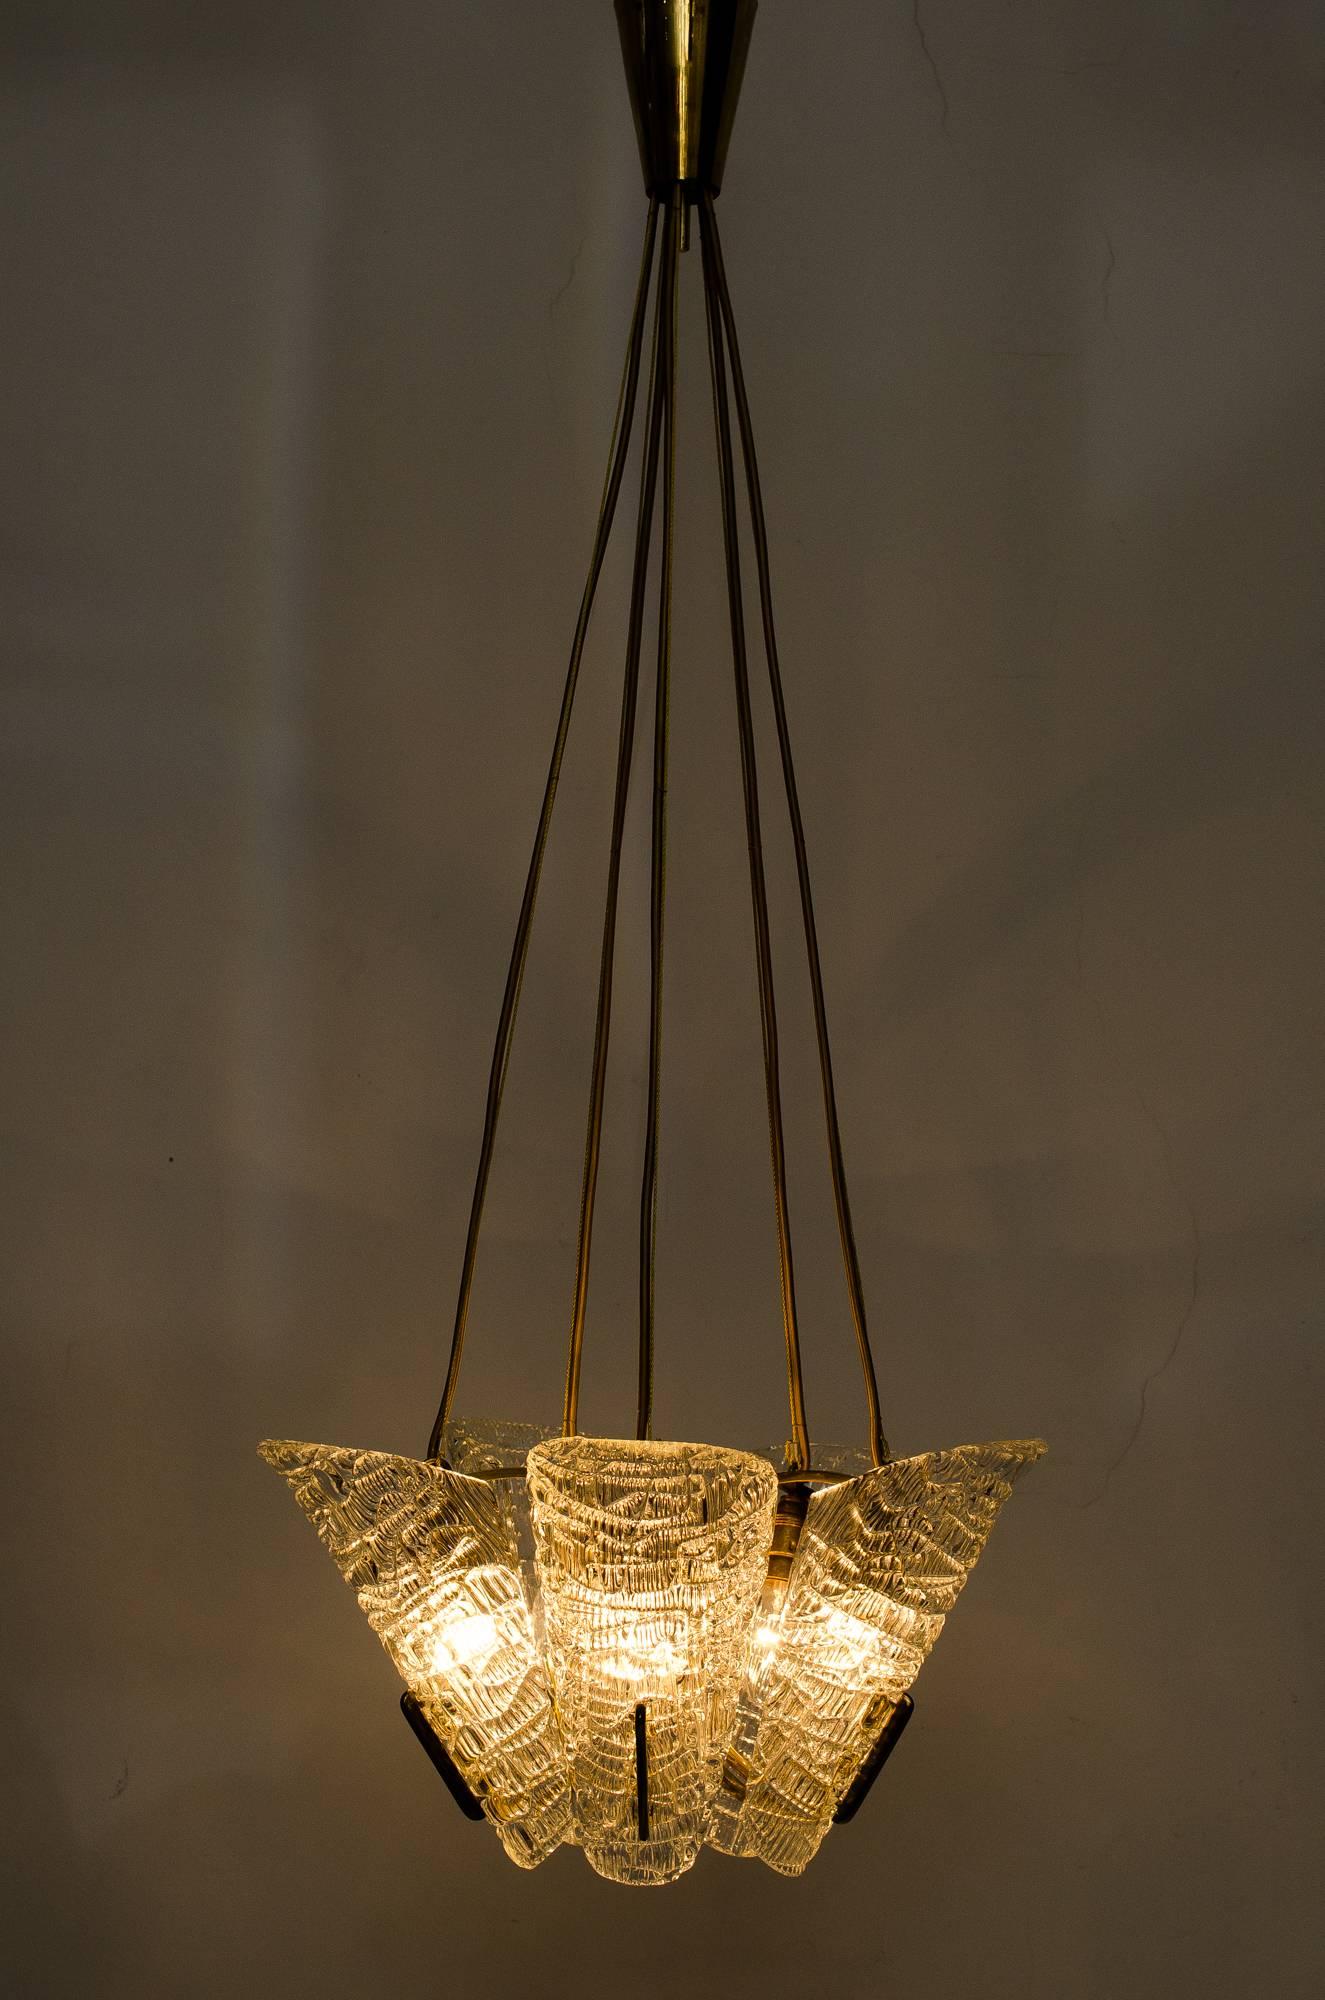 Mid-20th Century Beautiful Klamar Chandelier with Textured Glass, circa 1950s For Sale